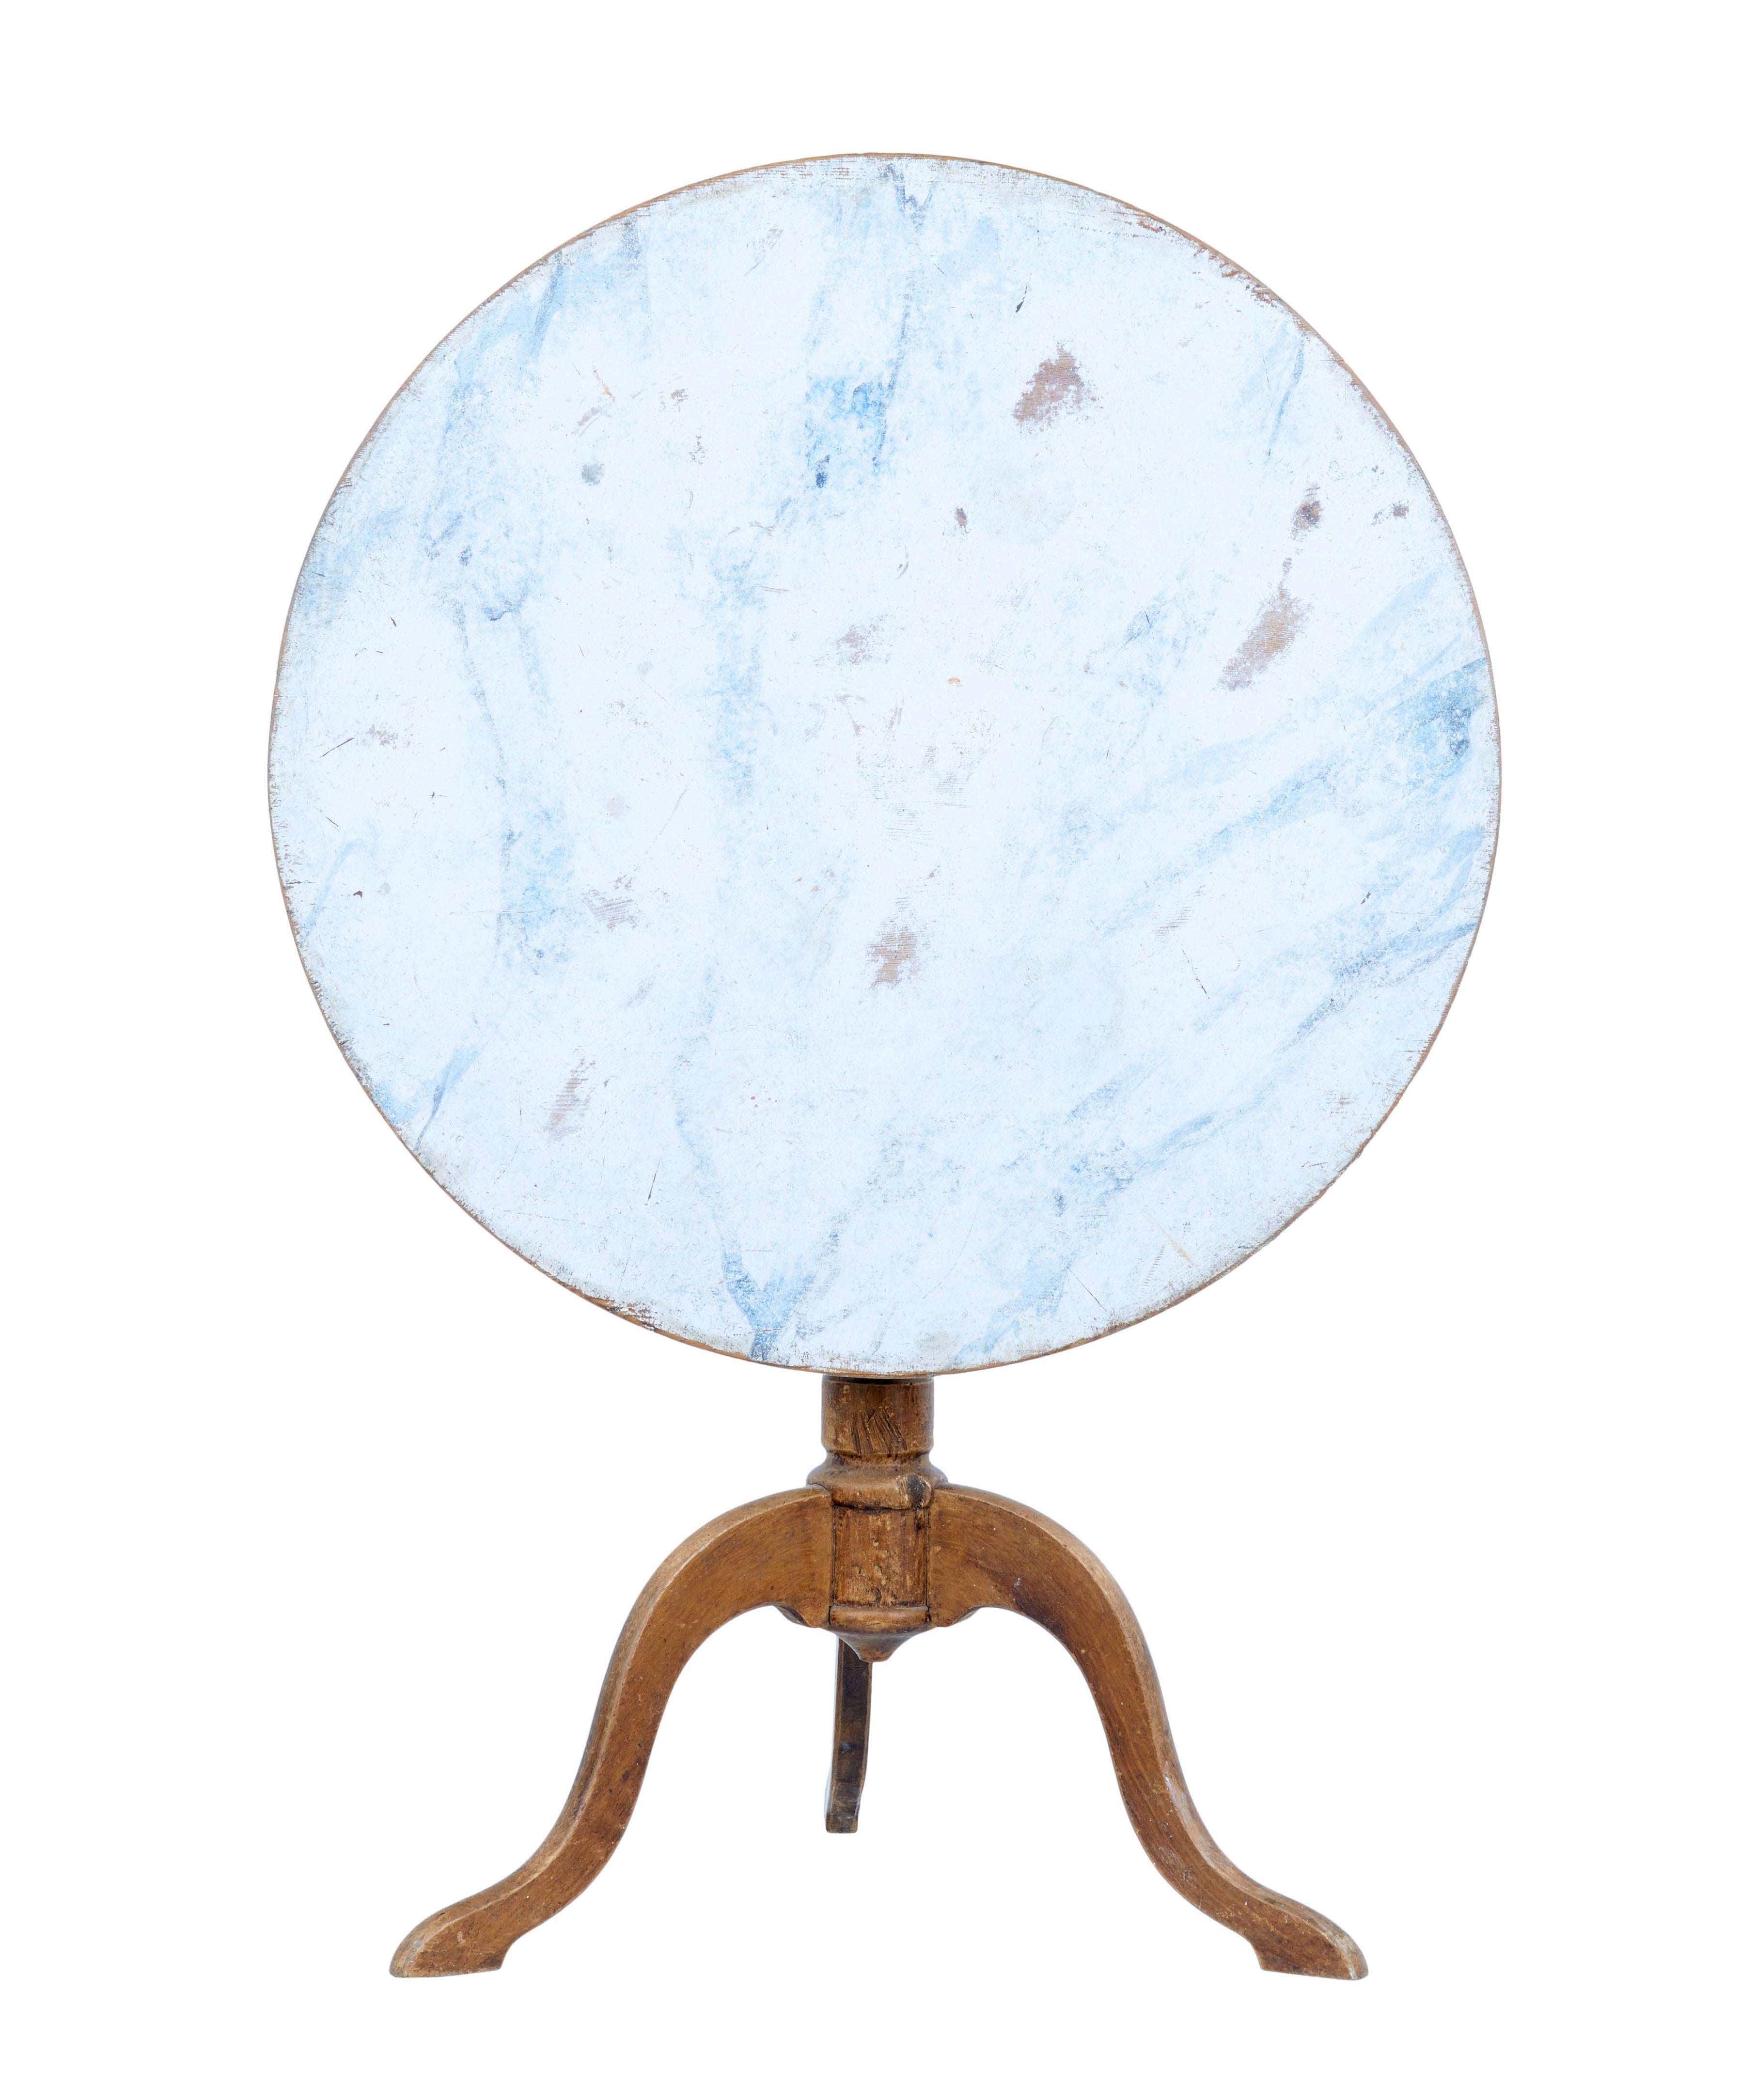 Fine rustic Swedish painted tripod table circa 1860.

Circular top with faux hand painted marble effect, using whites and blues. Table fixes in place with peg. Standing on turned stem and 3 scrolled legs.

Base with traces of original